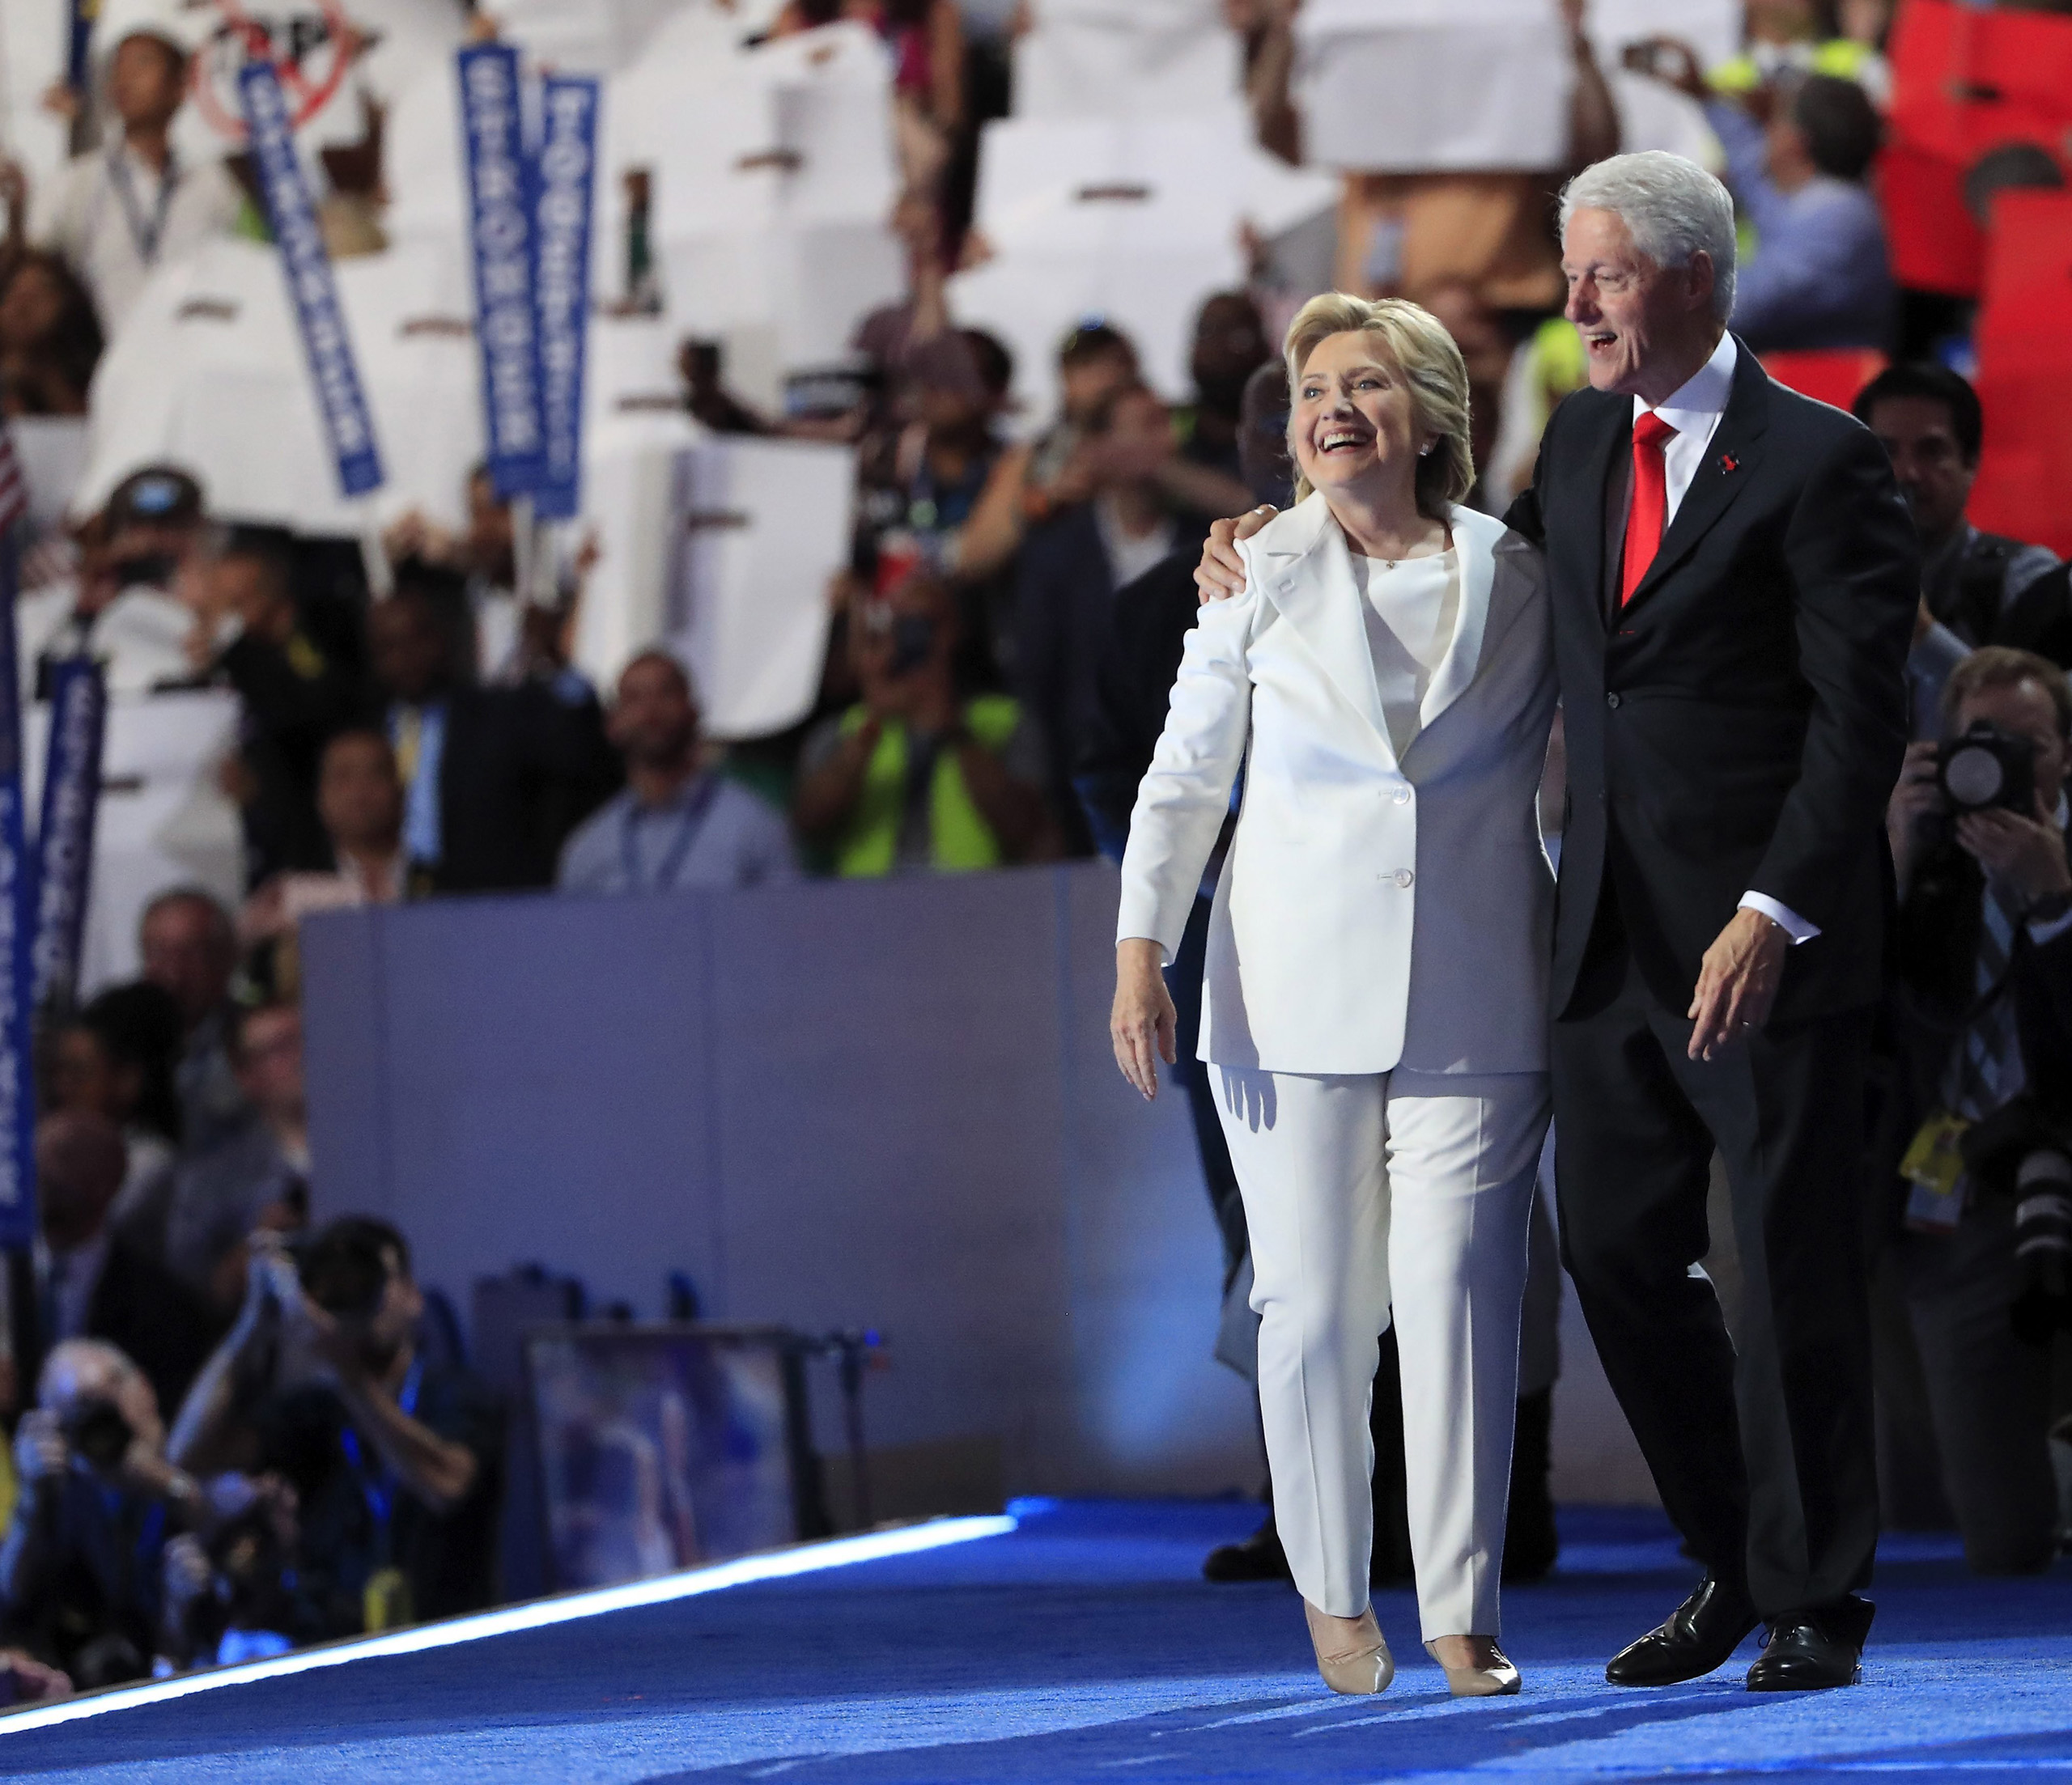 Democratic Nominee for President Hillary Clinton and former US President Bill Clinton on stage during final day of the Democratic National Convention at the Wells Fargo Center in Philadelphia on July 28, 2016. (Tannen Maury—EPA)